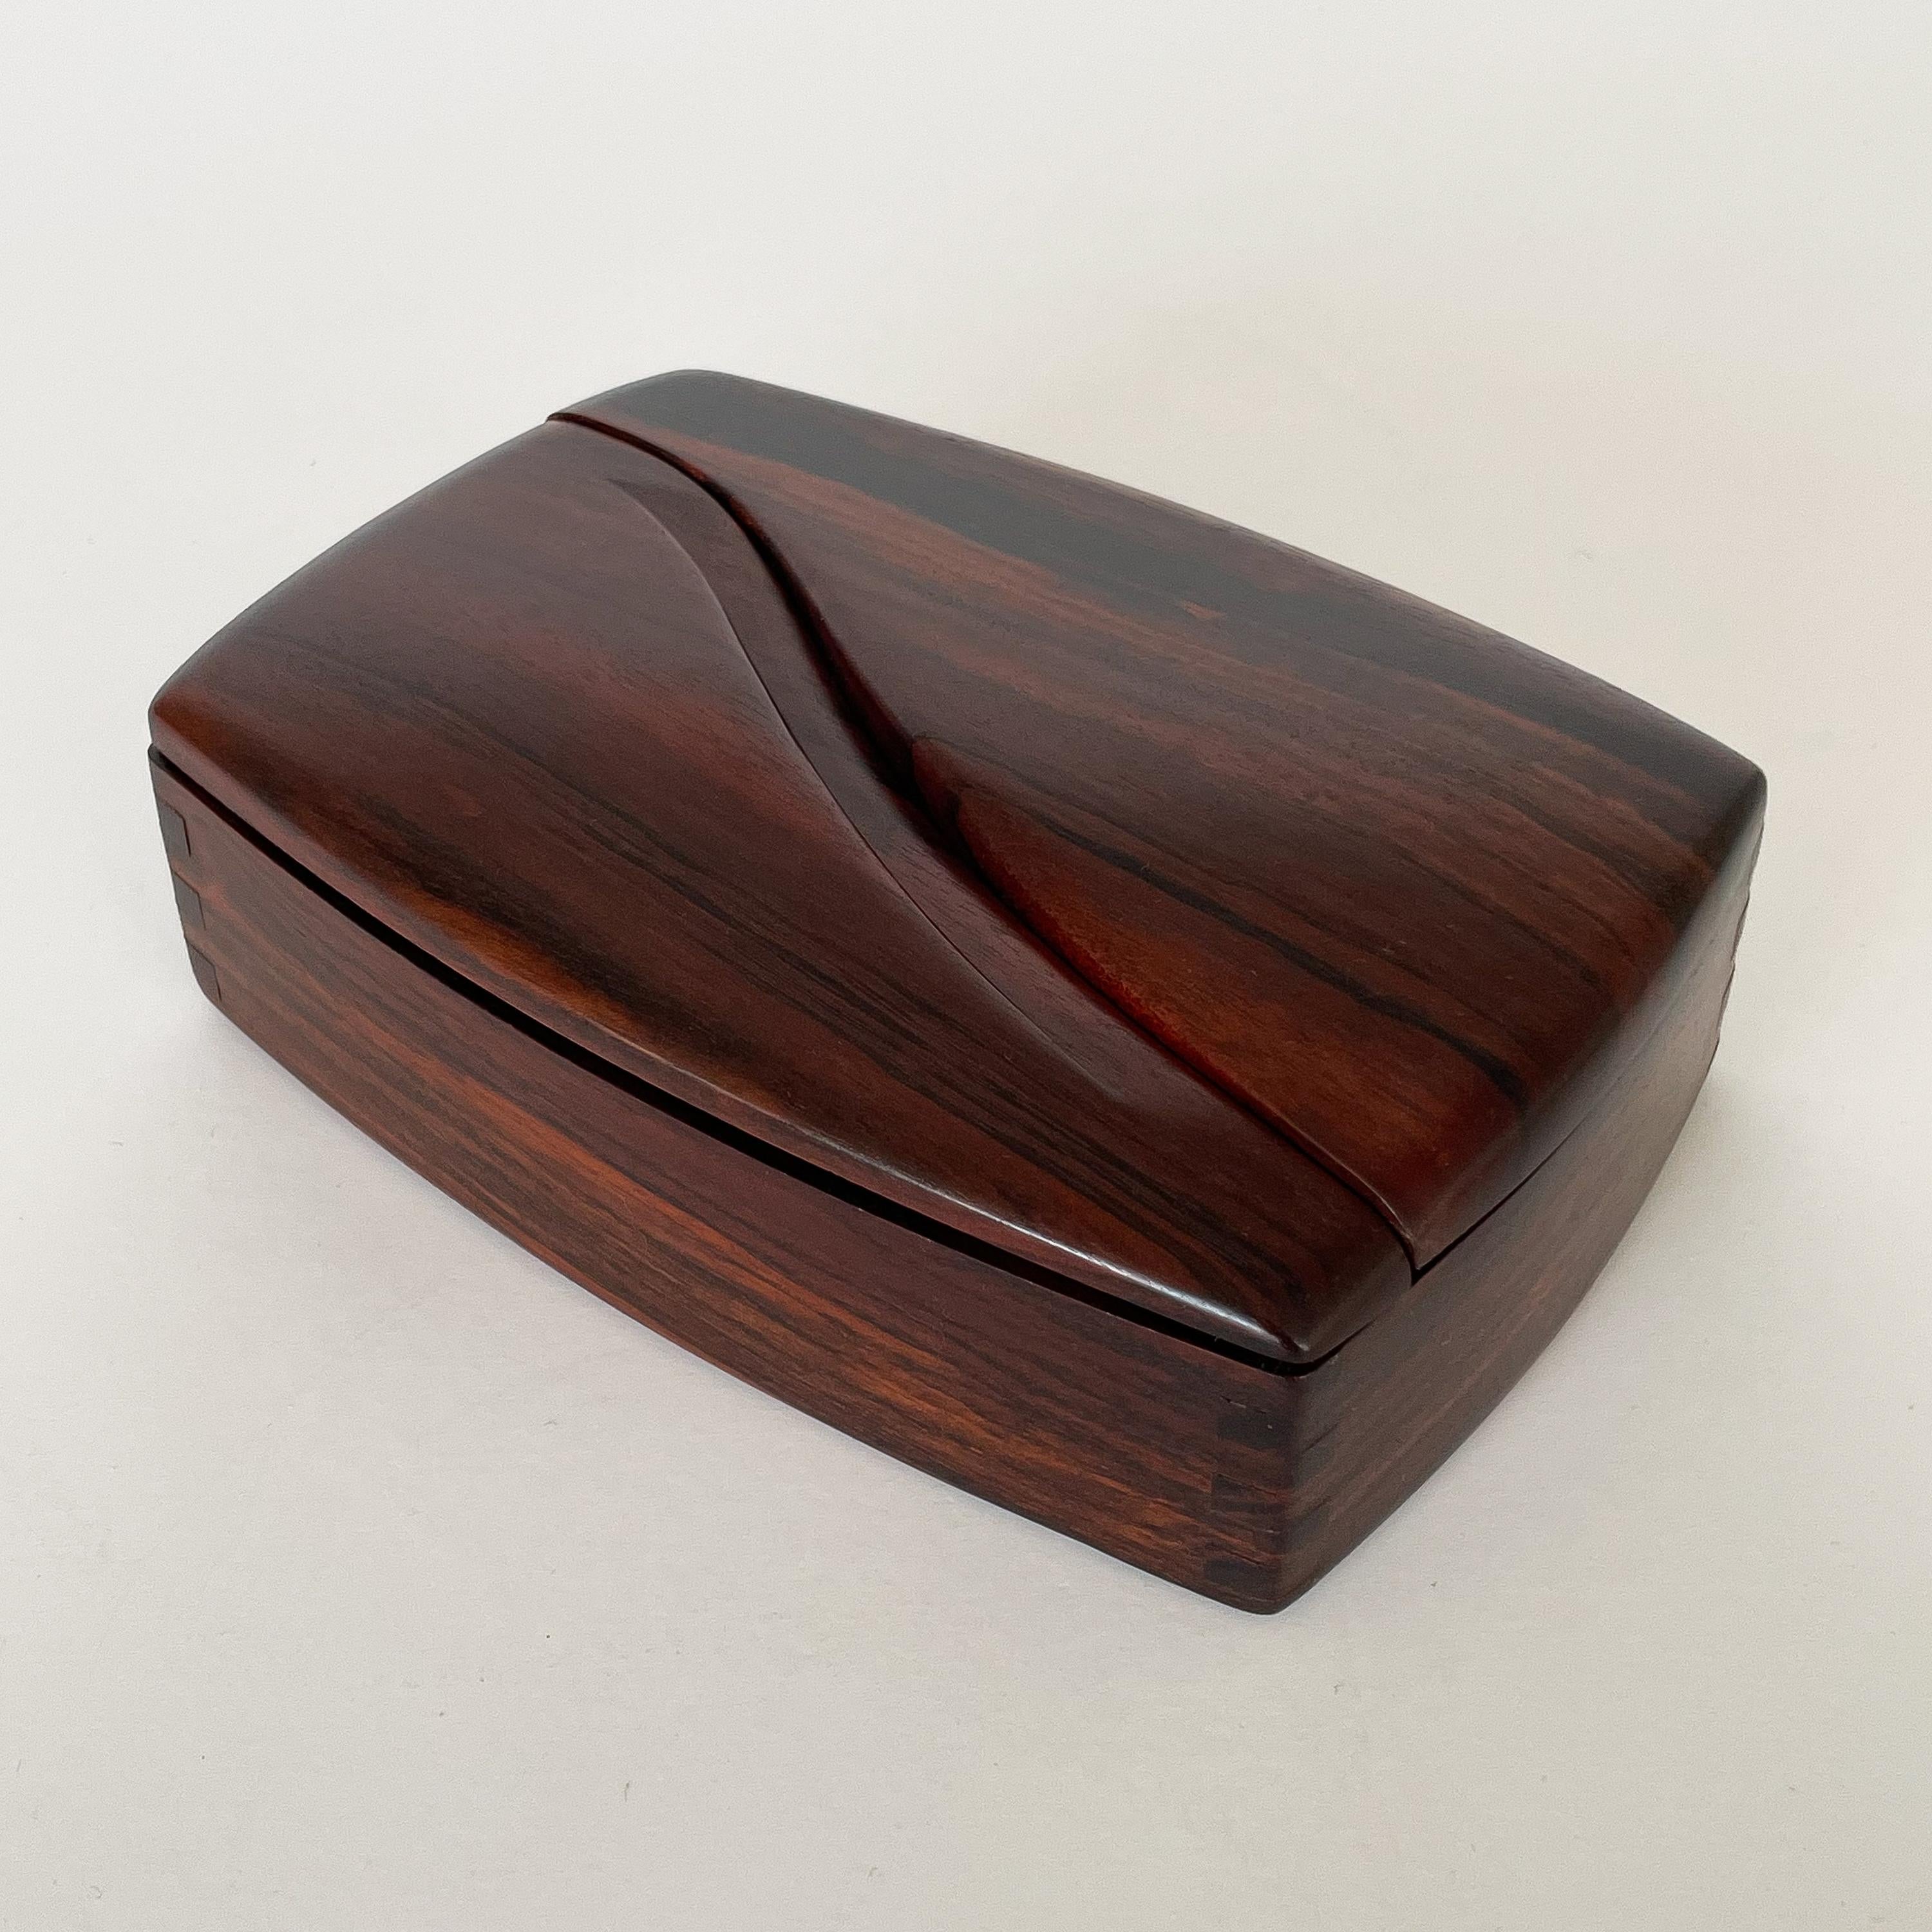 An American Studio Craft carved solid rosewood jewelry / trinket box by Craig Brown, circa 1980s. This modern box features a sculptural split dual swing hinged opening top. Fluid curved shape with beautiful finger joints to corners. Stunning grain